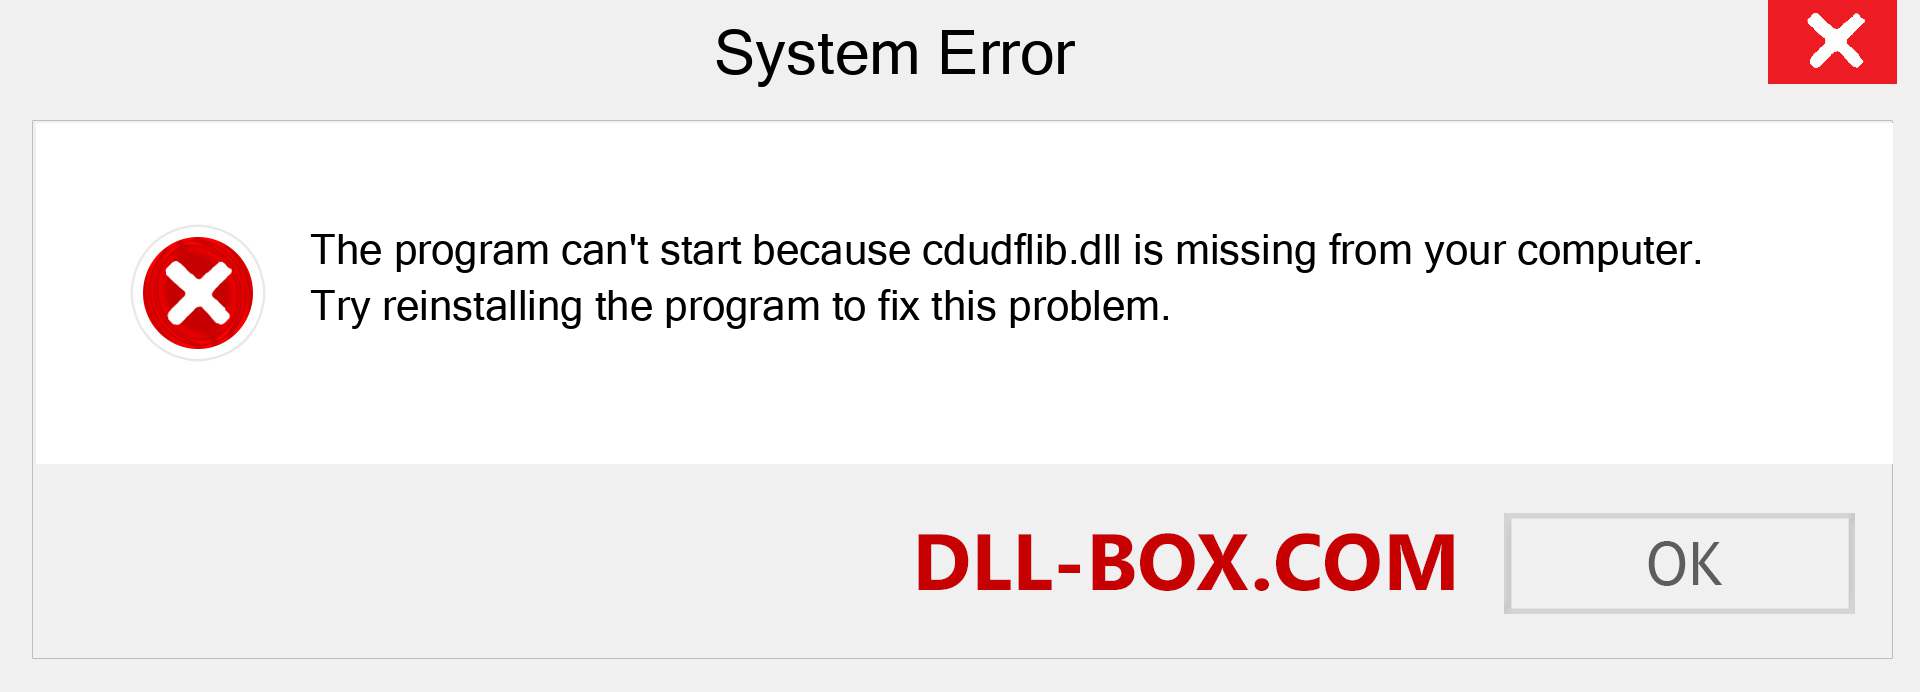  cdudflib.dll file is missing?. Download for Windows 7, 8, 10 - Fix  cdudflib dll Missing Error on Windows, photos, images